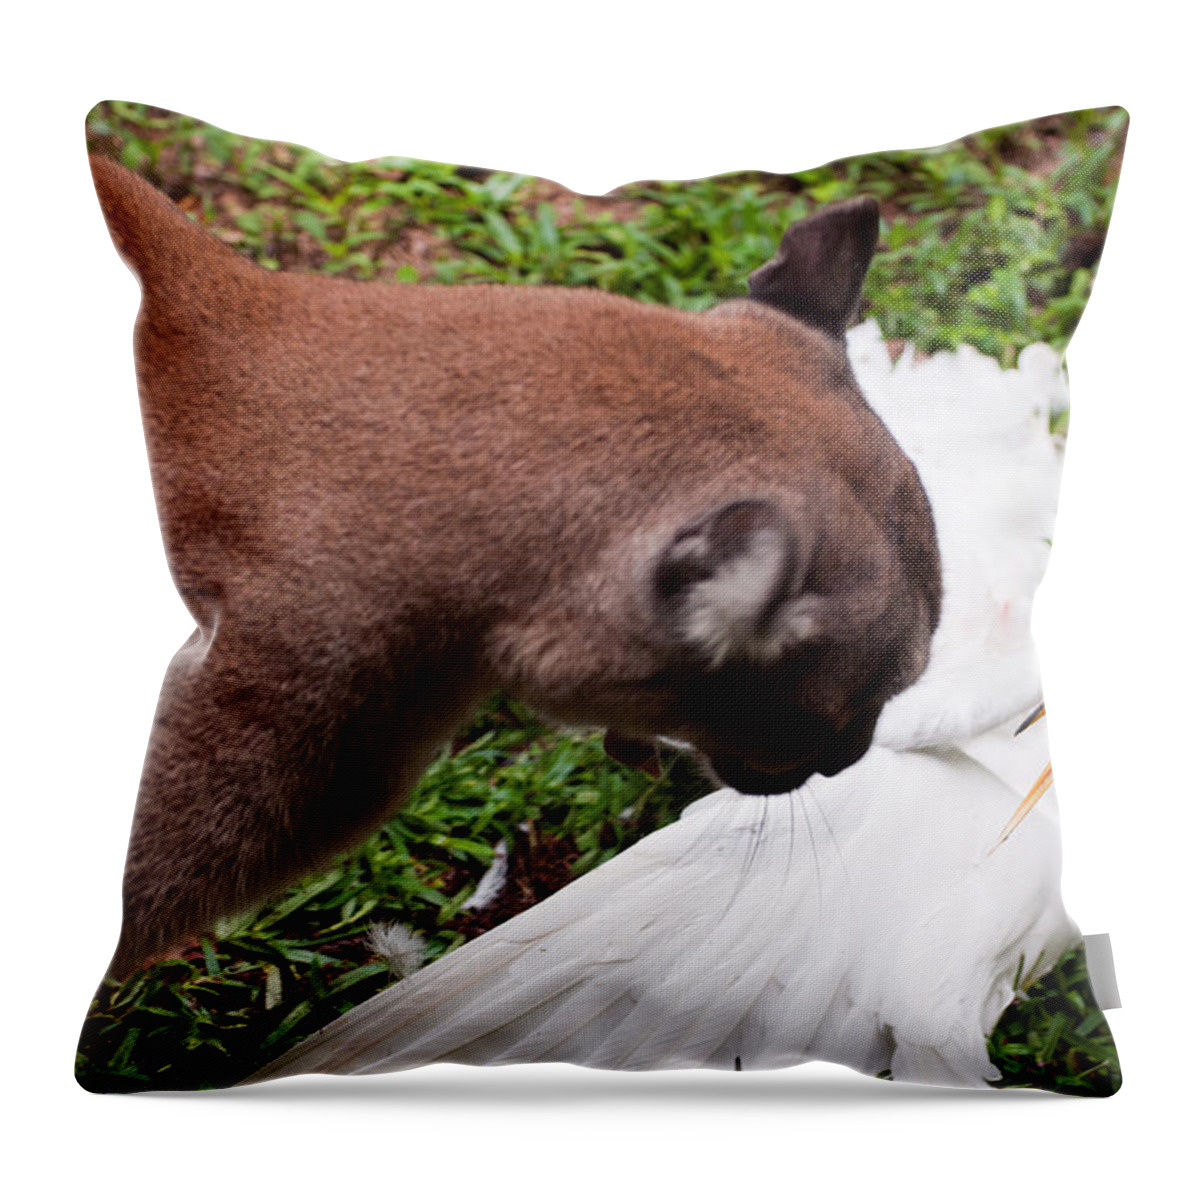 Cougar Throw Pillow featuring the photograph Predator and Prey by Donna Proctor